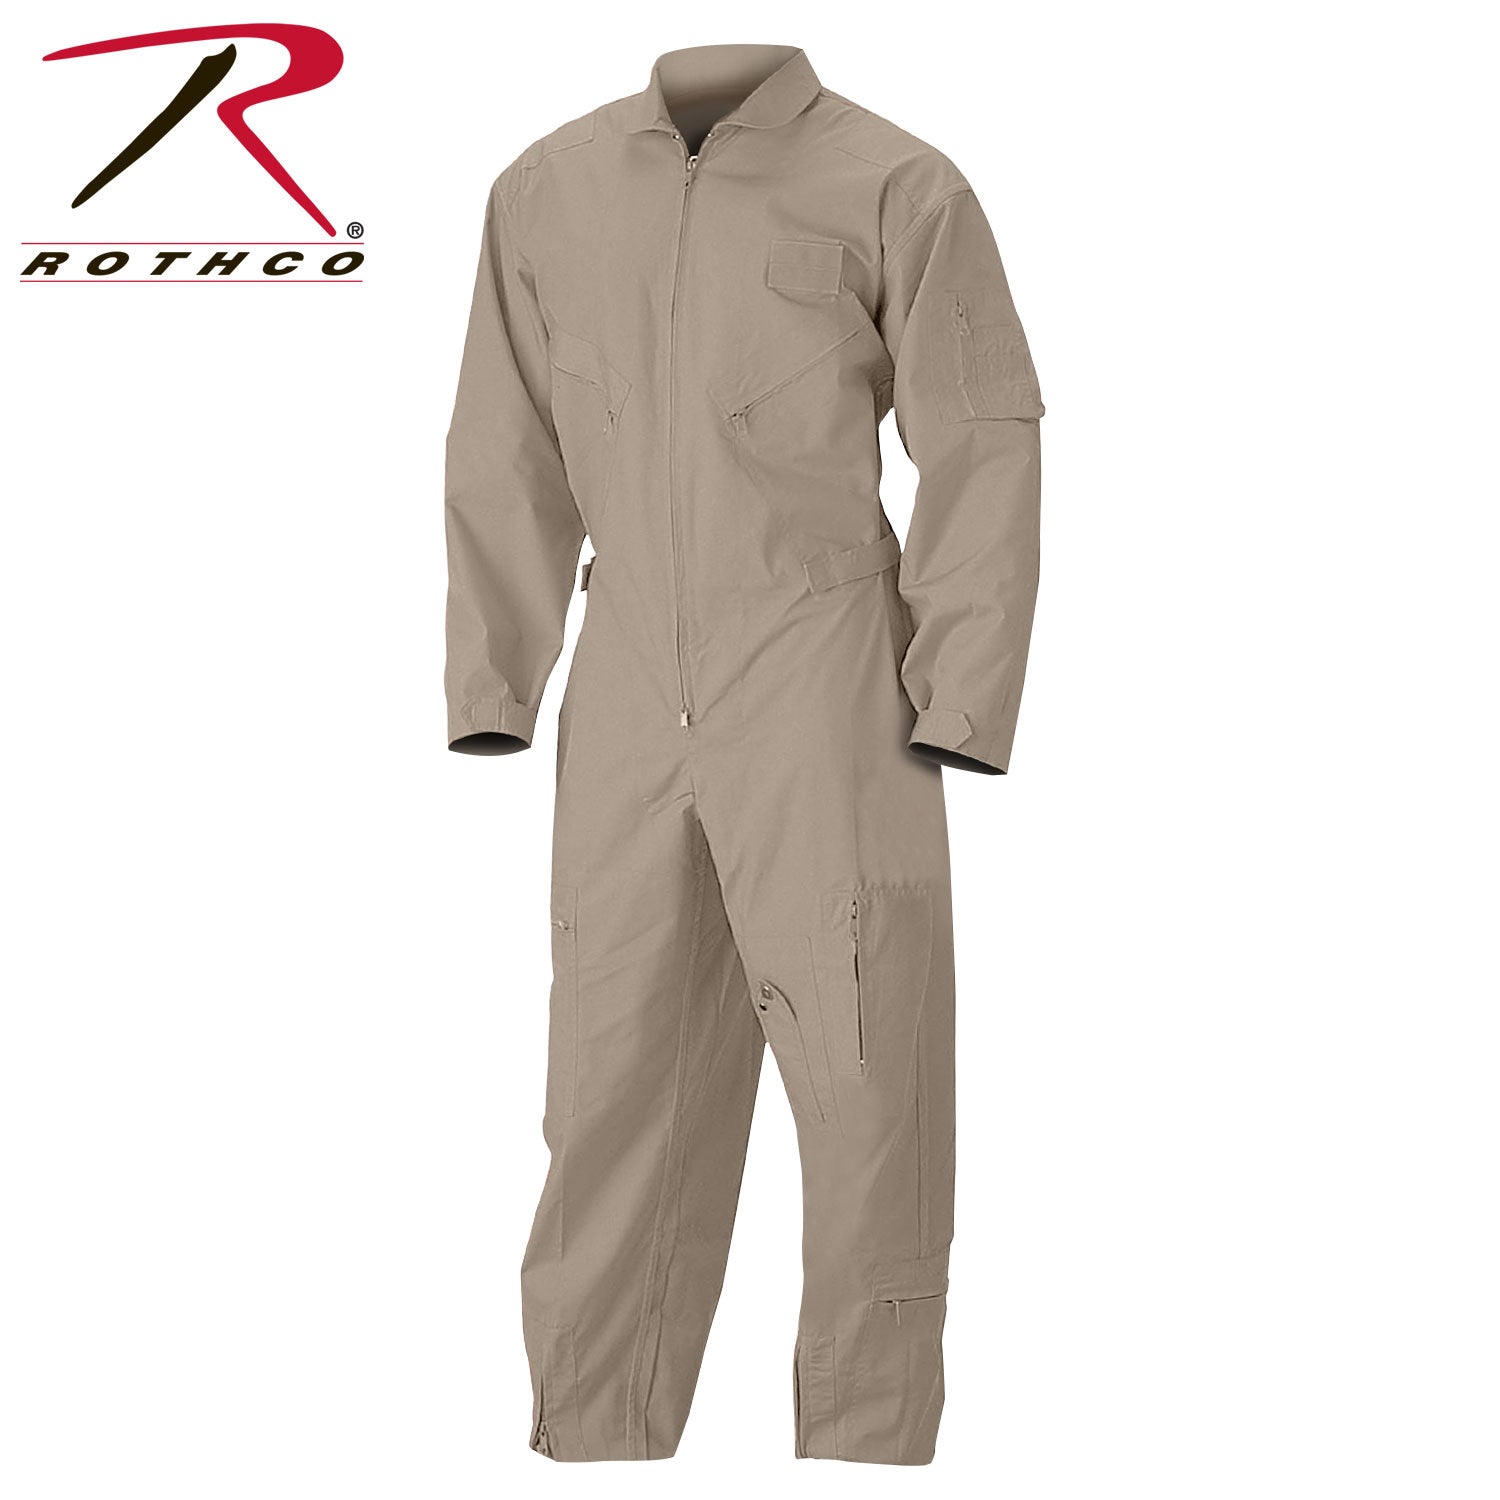 Rothco Flightsuits - Tactical Choice Plus